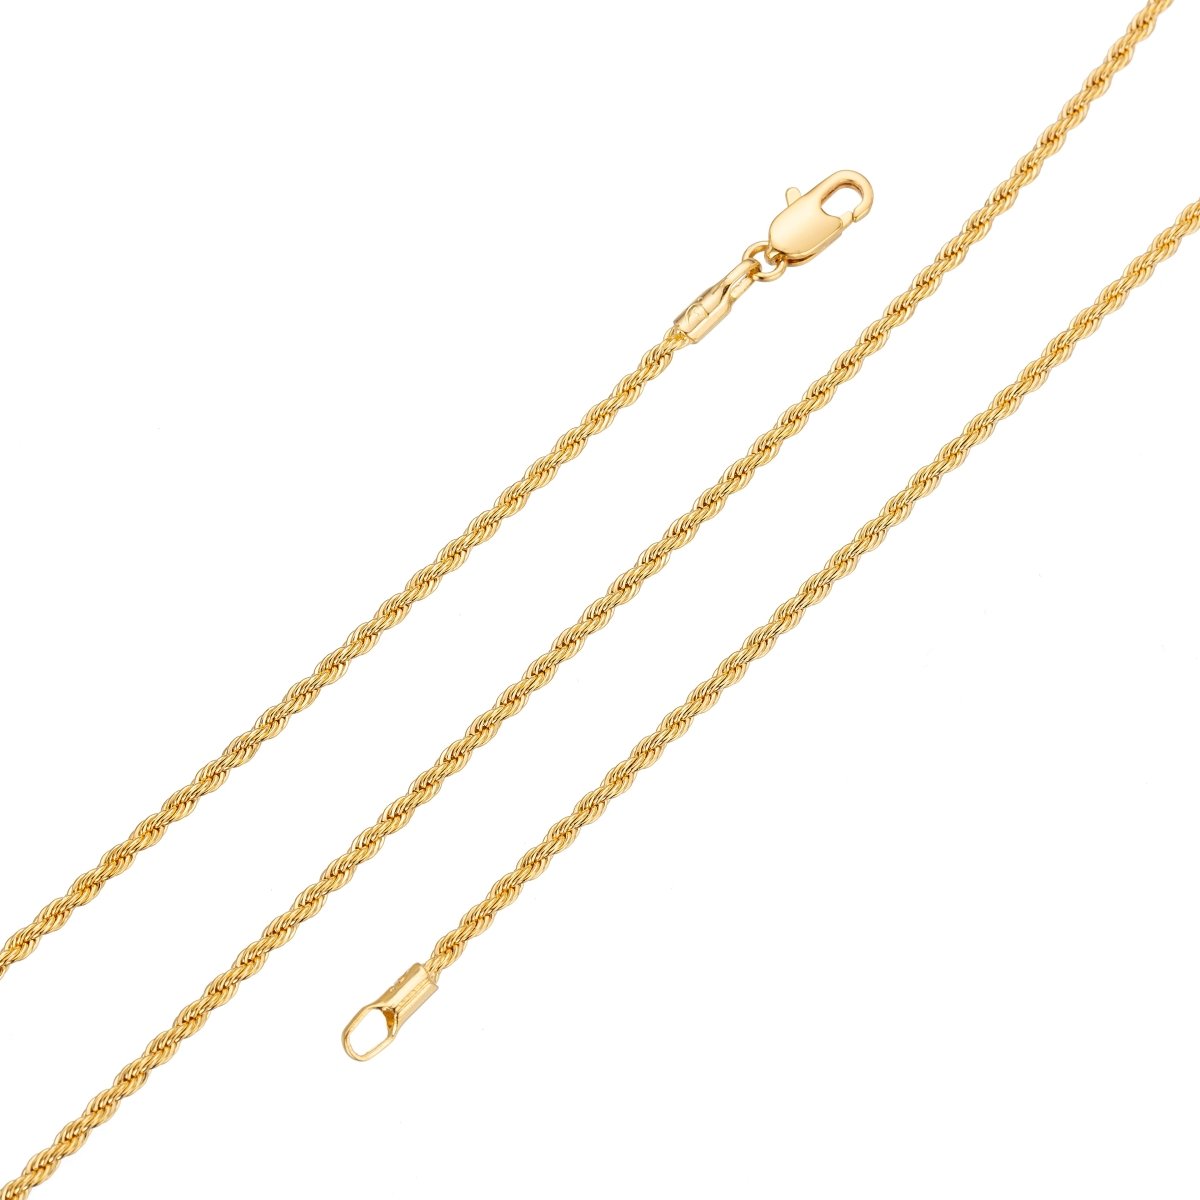 18K Gold Filled Rope Chain Necklace, 23.5 inch Rope Finished Necklace For Jewelry Making, Dainty 2.3mm Width Rope Necklace w/ Lobster Clasps | CN-072 Clearance Pricing - DLUXCA